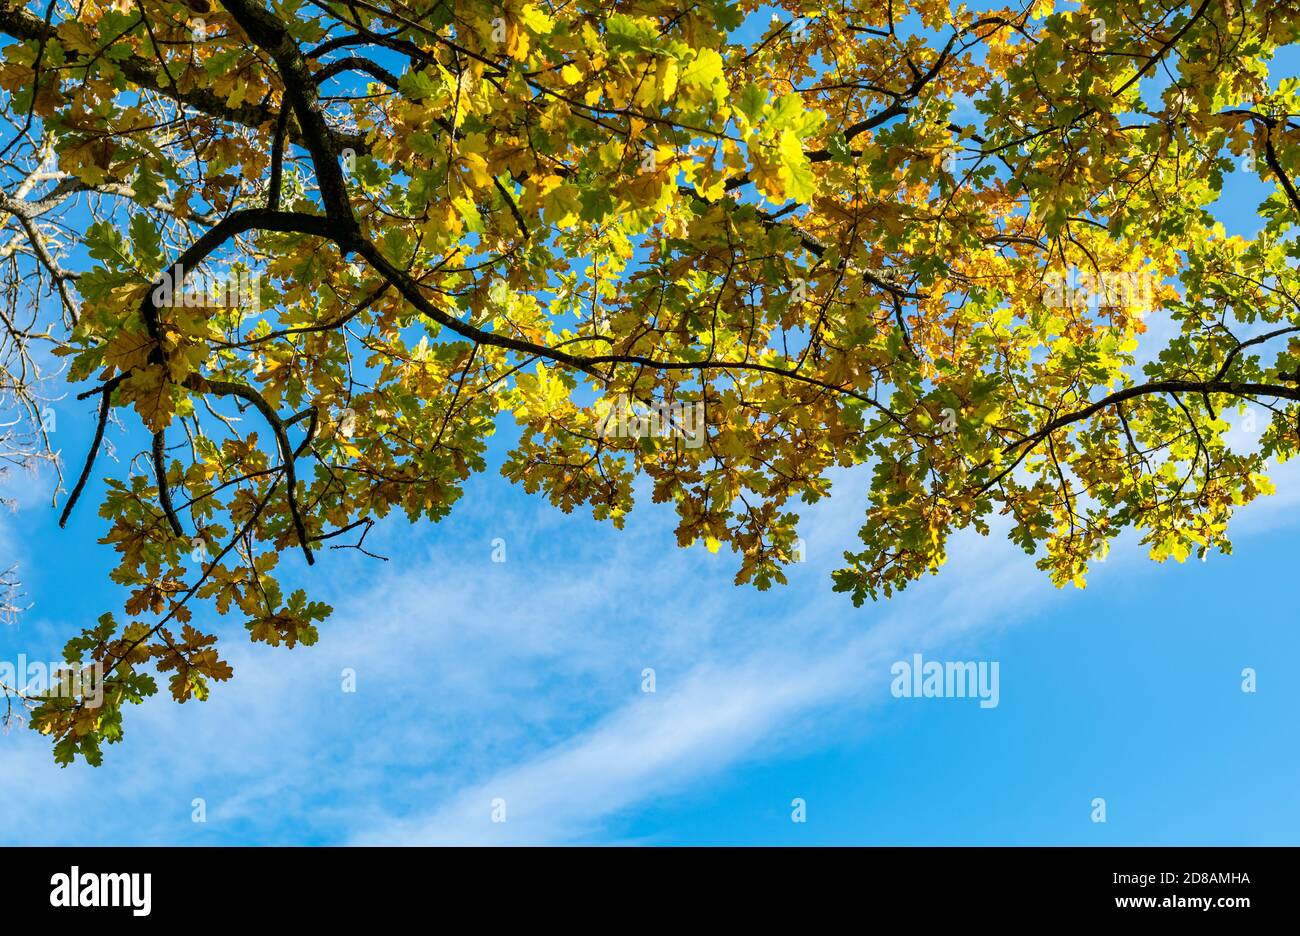 Colourful sunlit Autumn leaves on oak tree looking up towards a blue sky on a sunny day Stock Photo